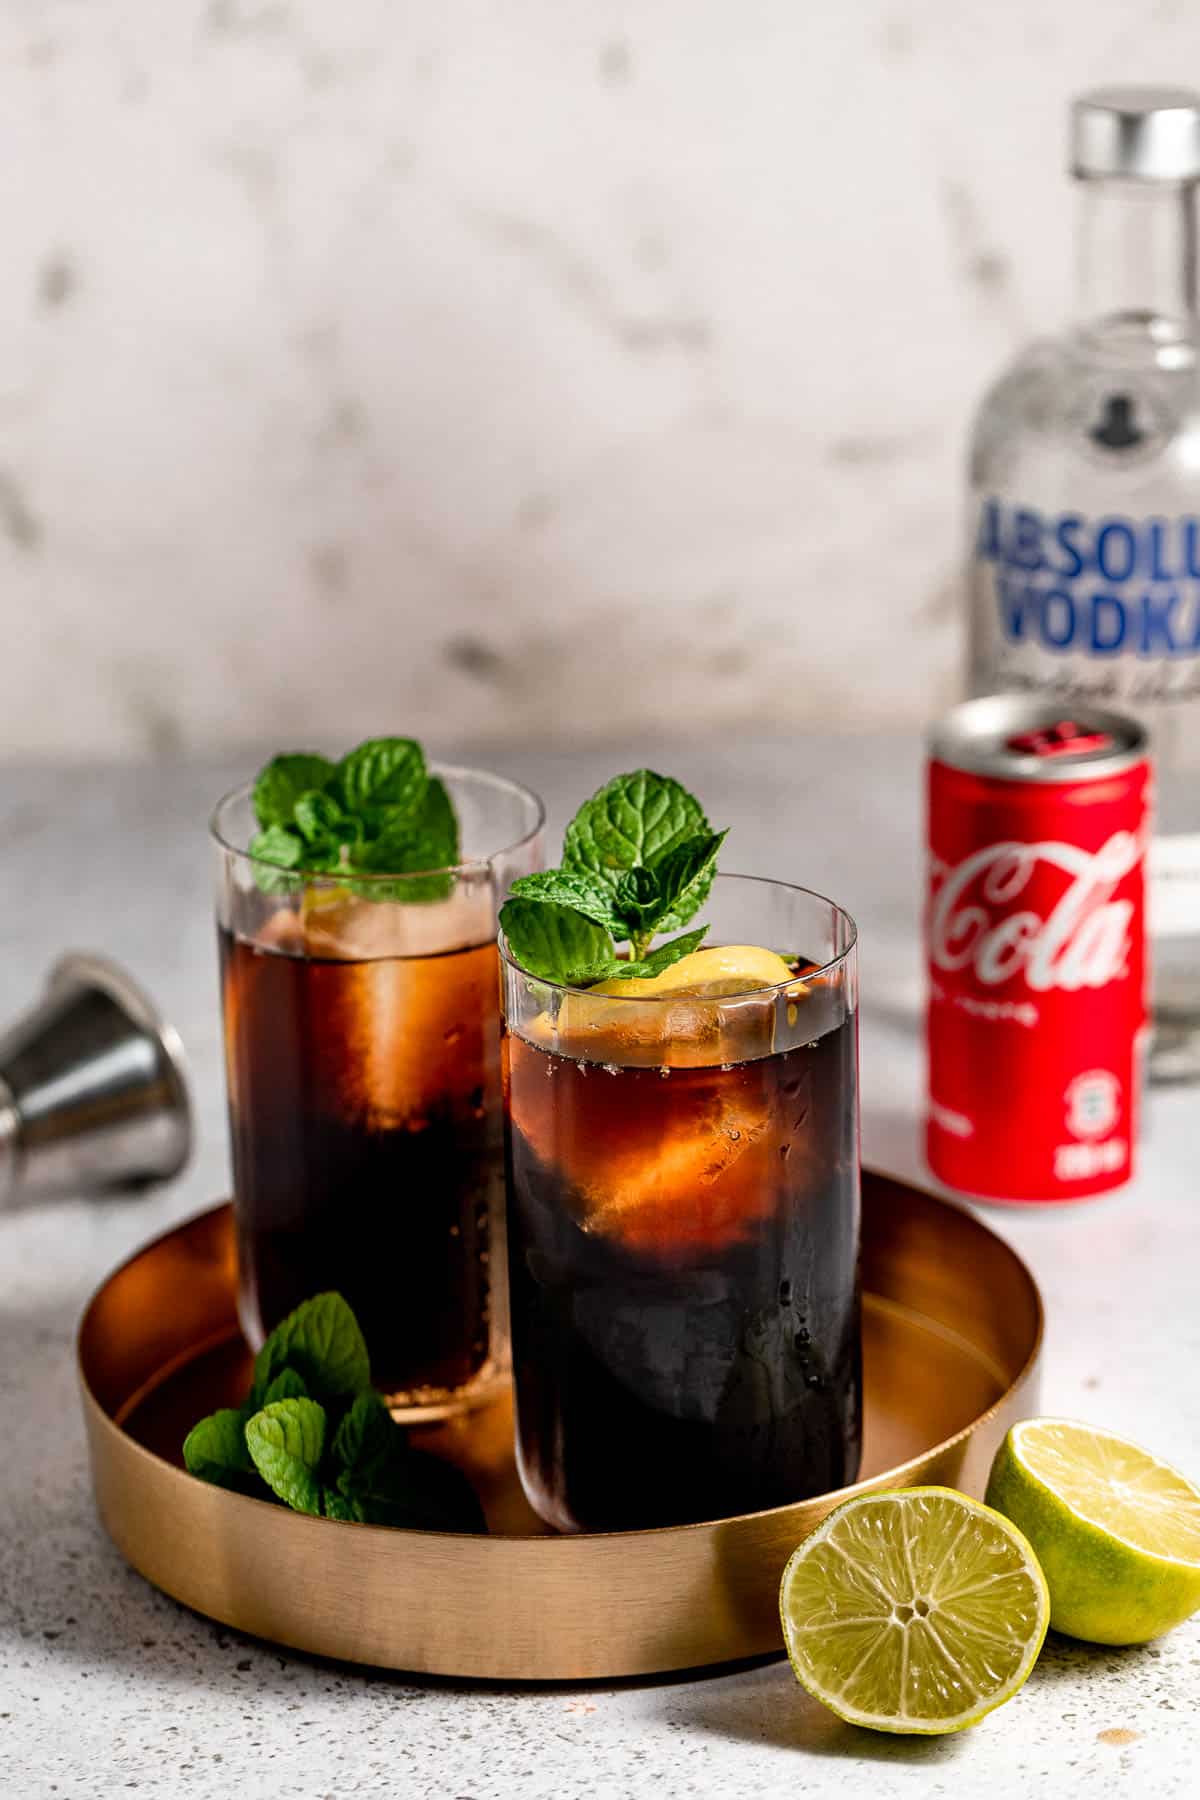 vodka and coke on gold tray with fresh mint and vodka bottle